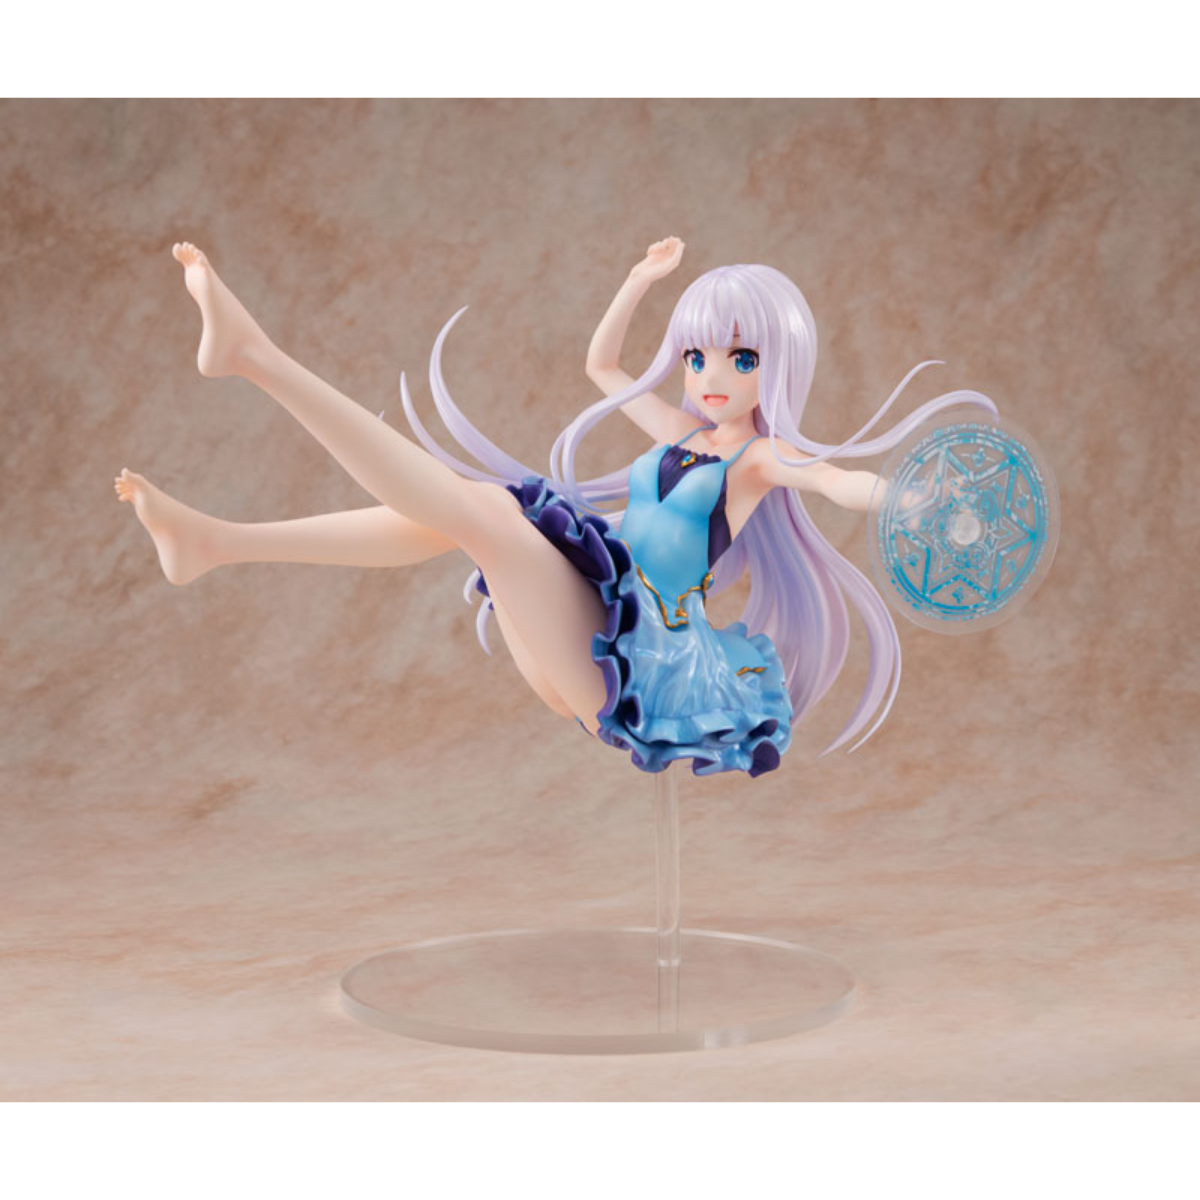 She Professed Herself Pupil Of The Wiseman 1/7 Scale Figure "Mira"-Good Smile Company-Ace Cards & Collectibles